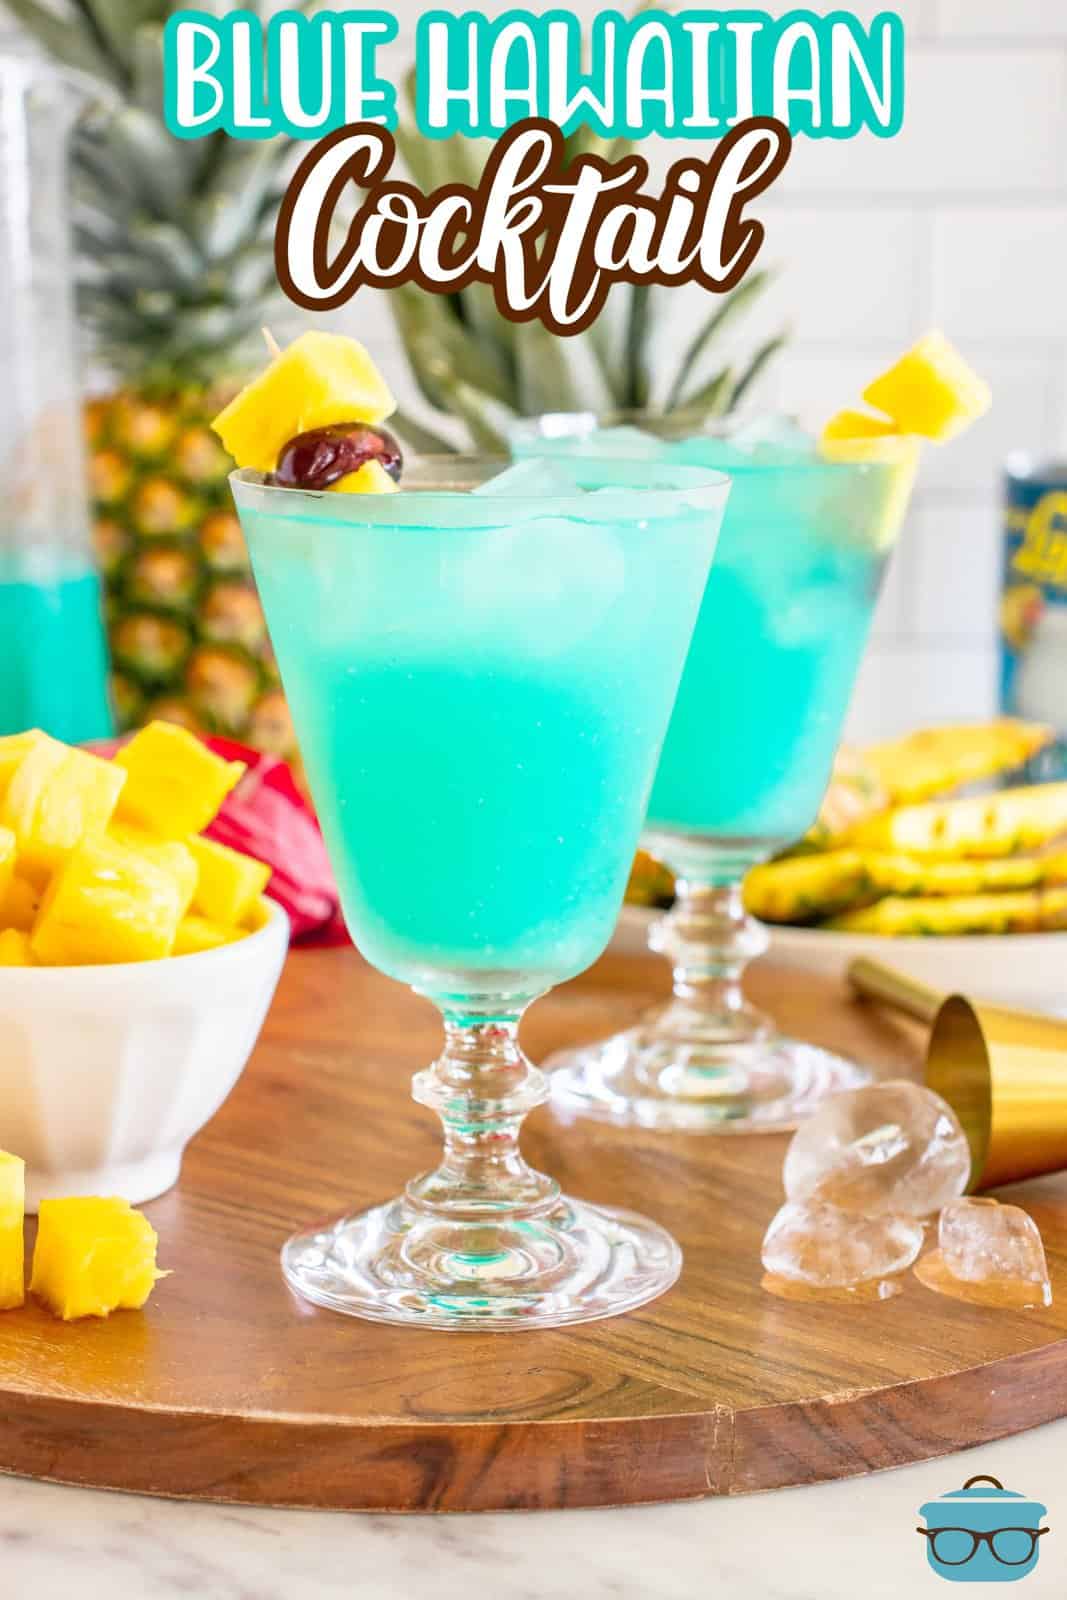 A blue Hawaiian cocktail in a glass.